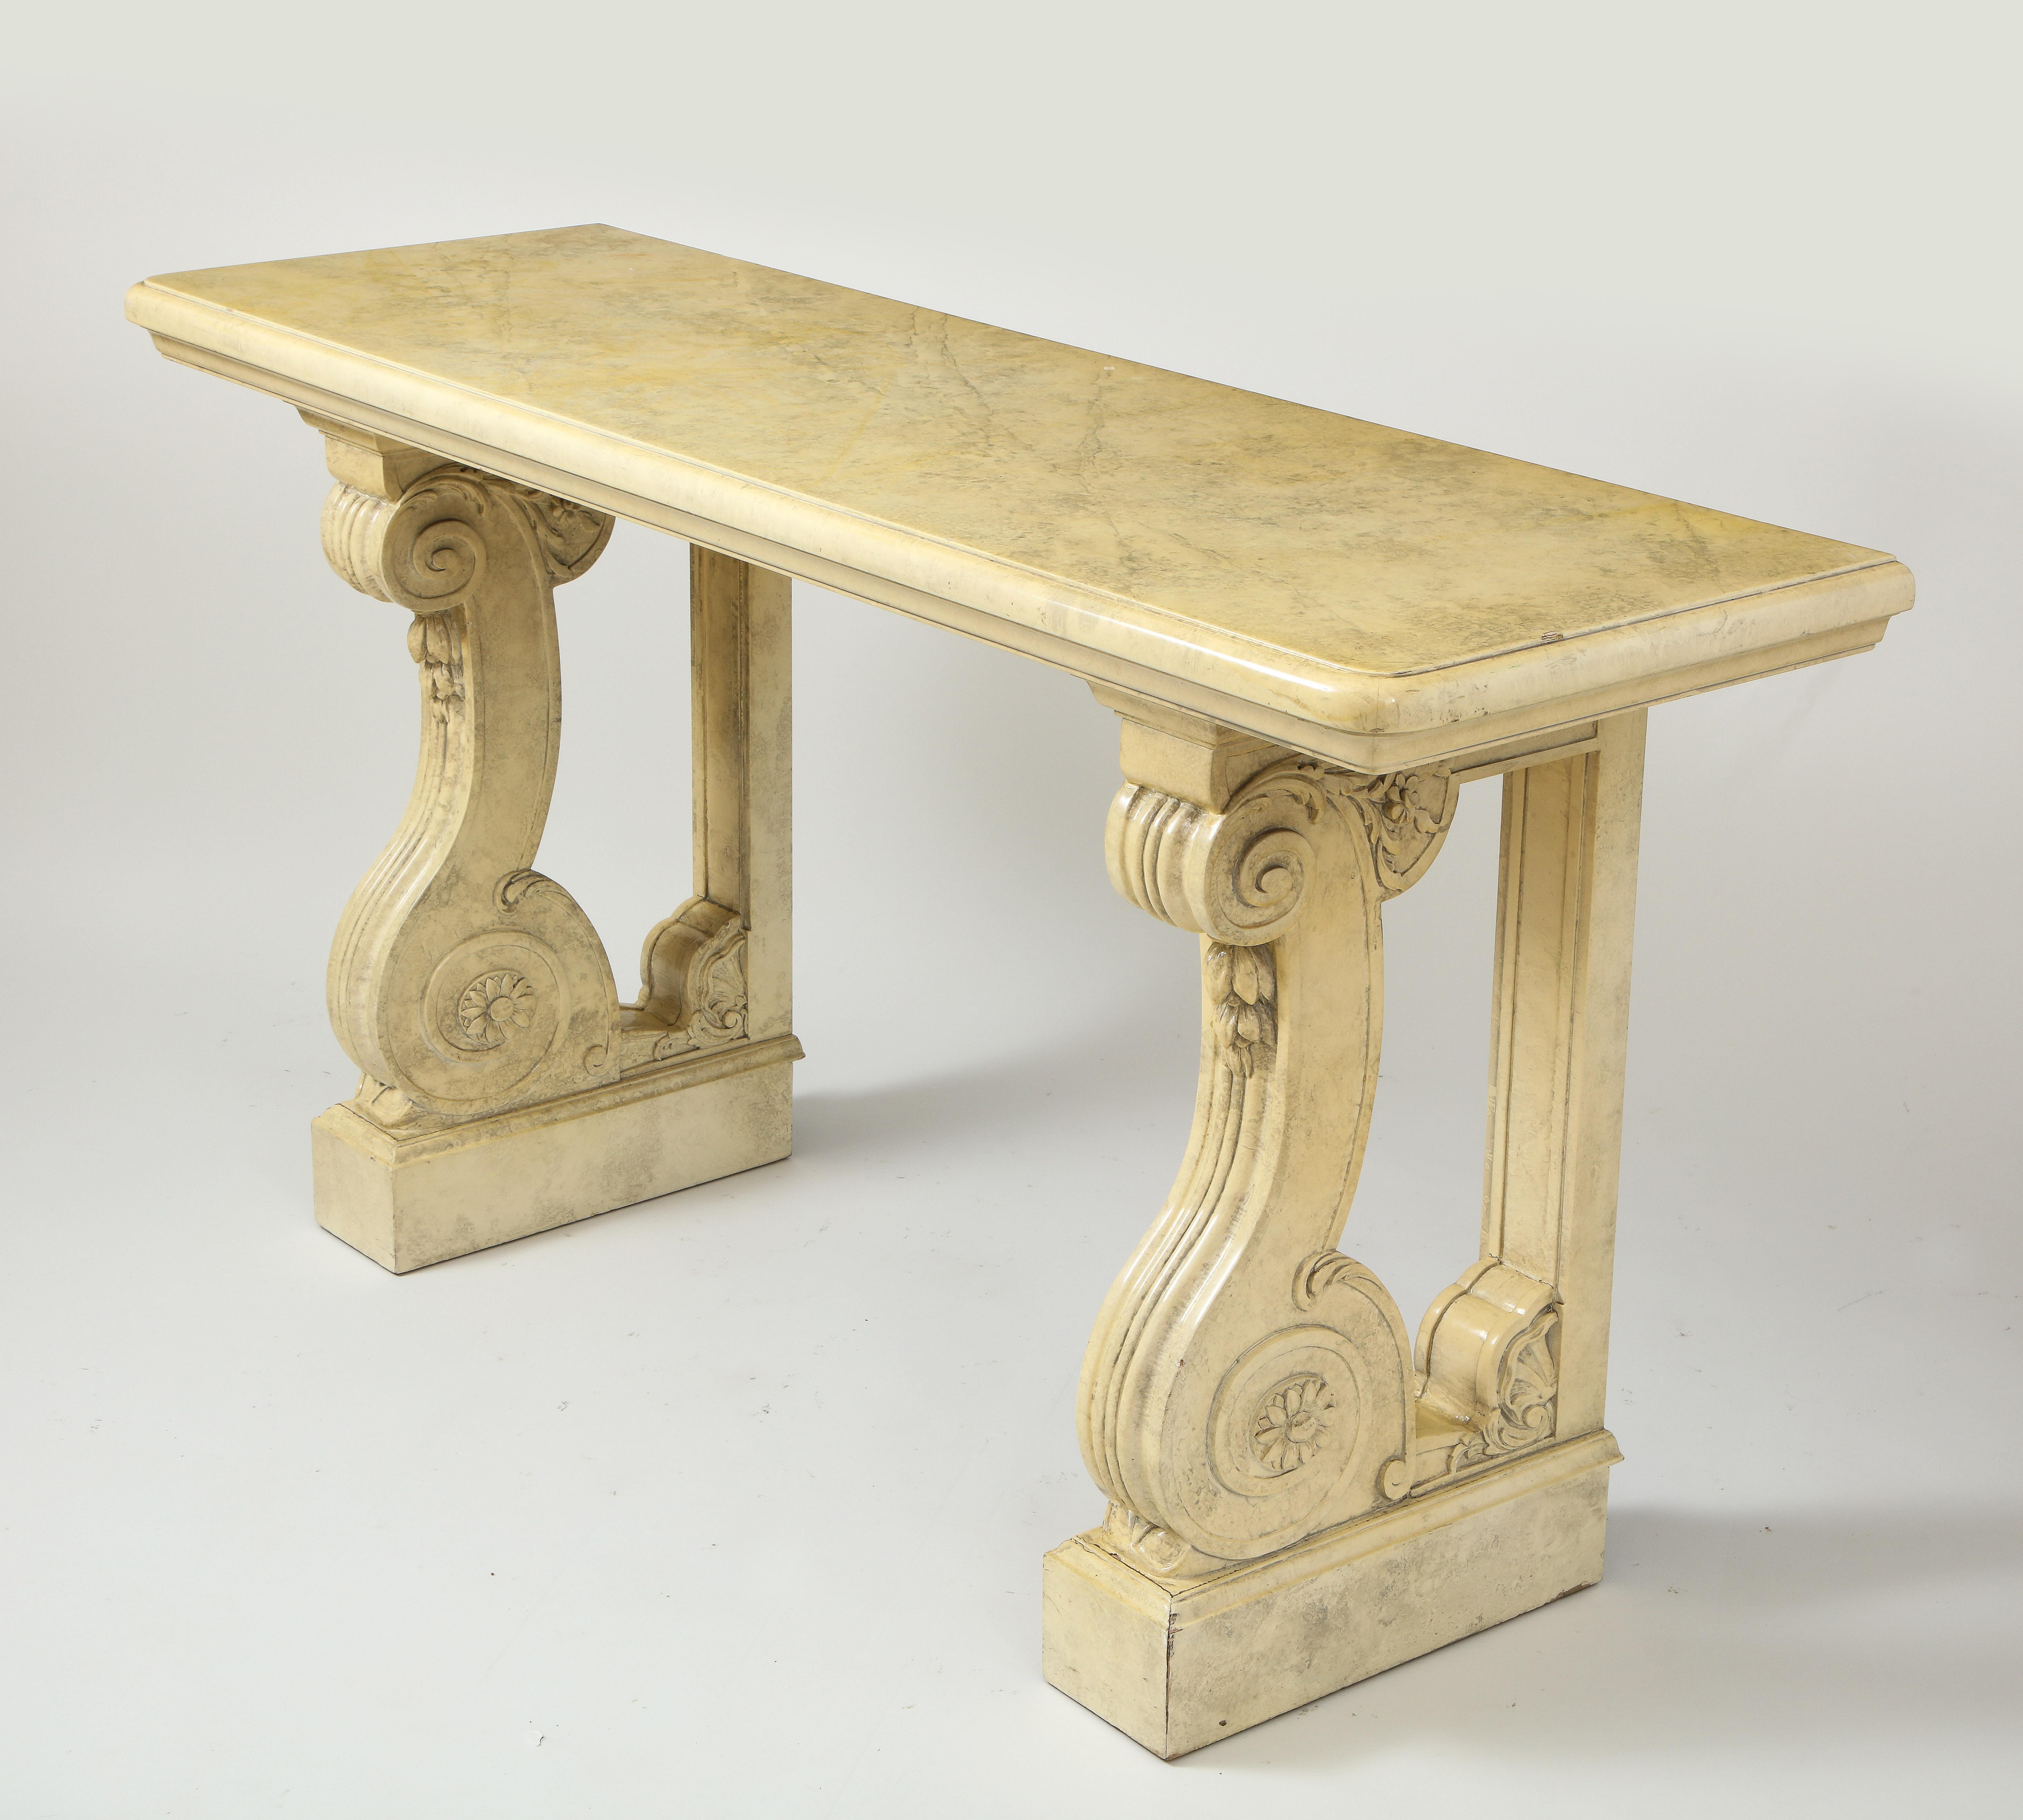 Beautifully faux painted in a cream marble faux finish, the rectangular top raised on two volute form supports terminating in sunflower heads and enriched with foliate decoration.